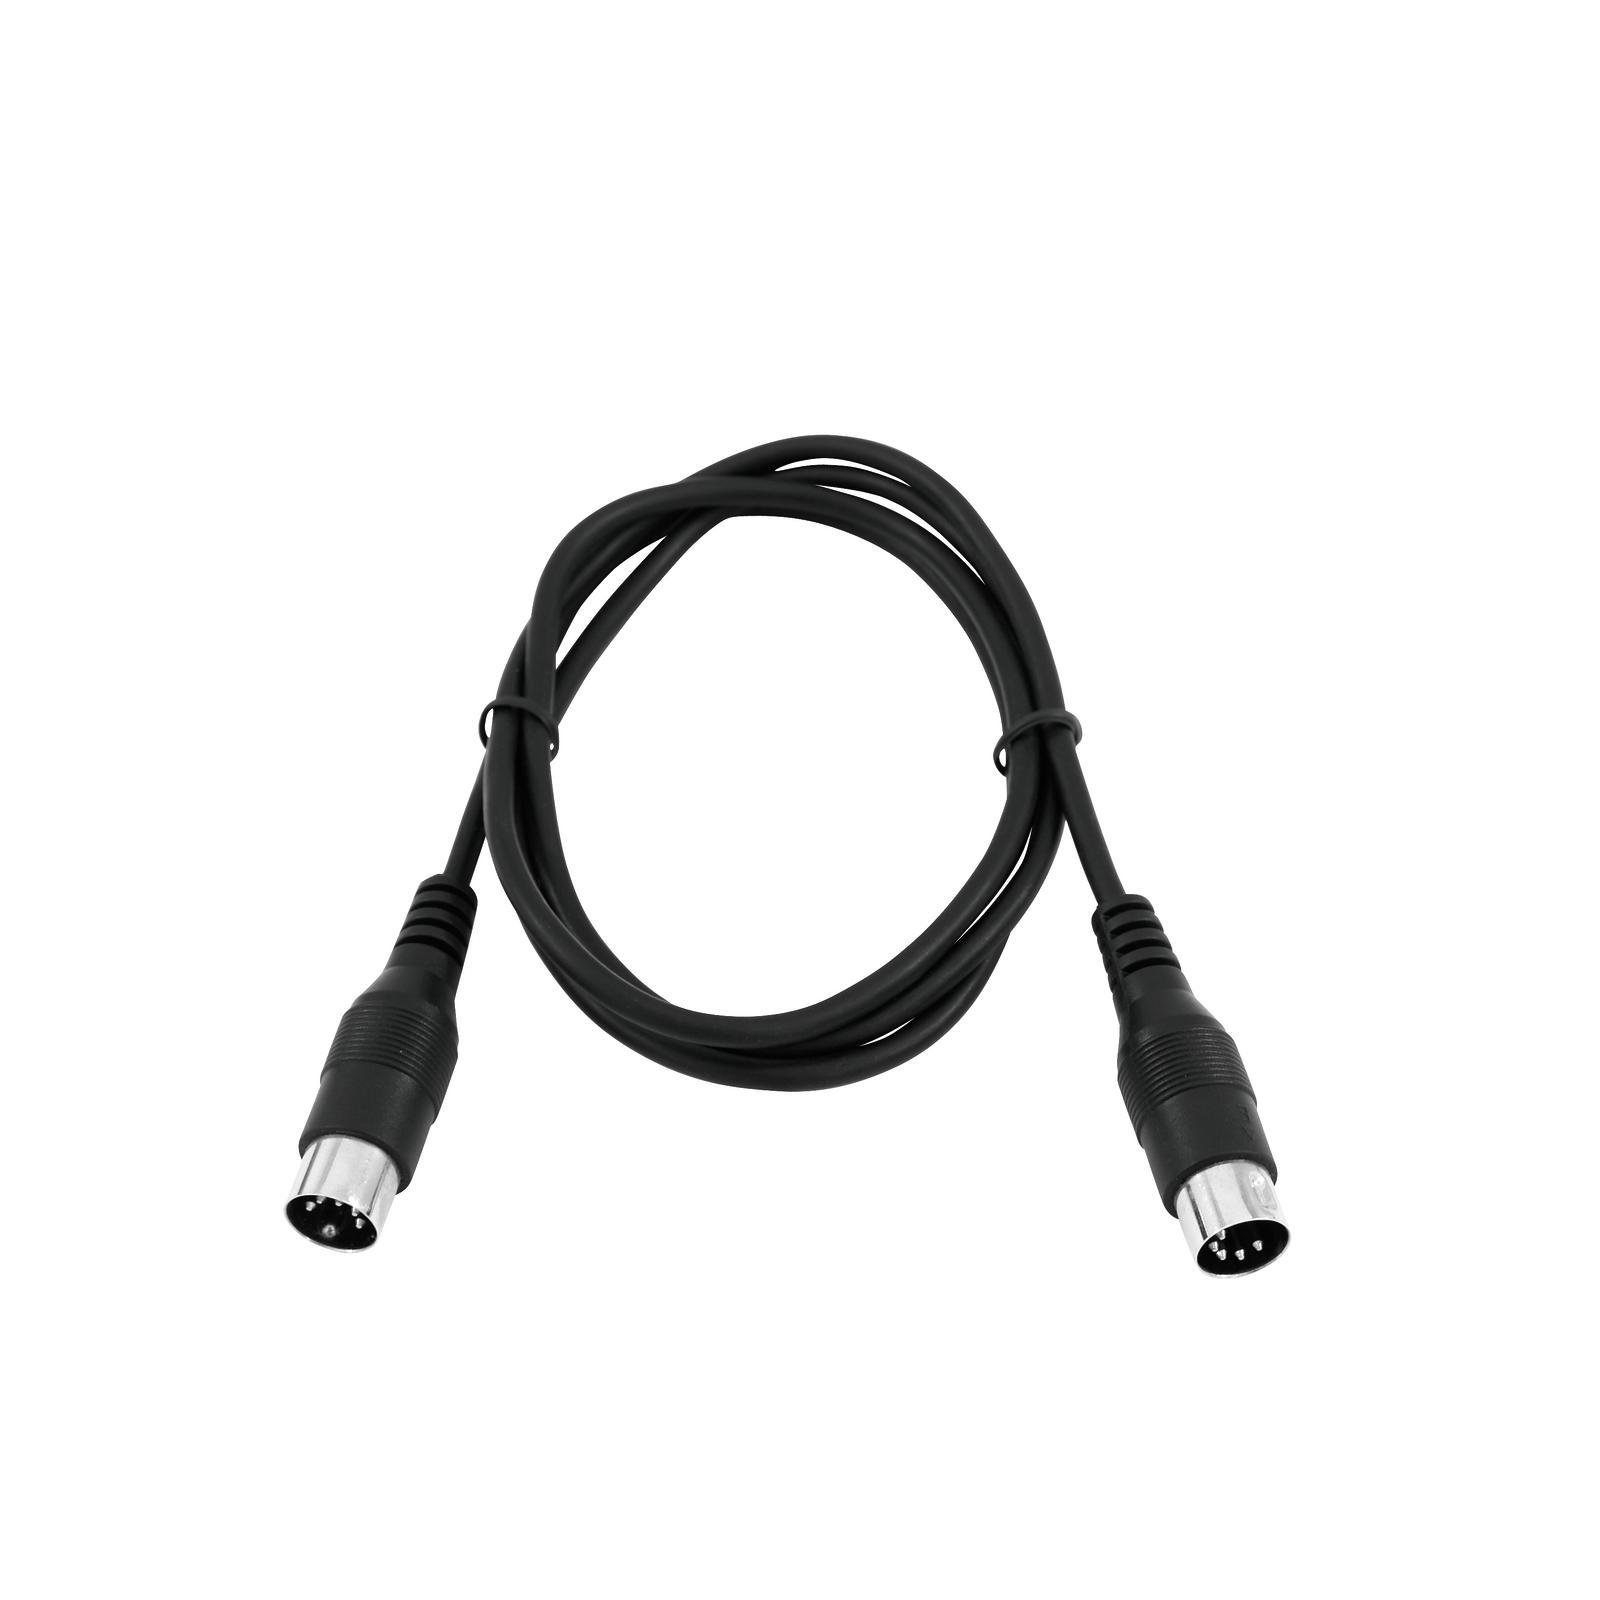 5 pin midi cable to usb